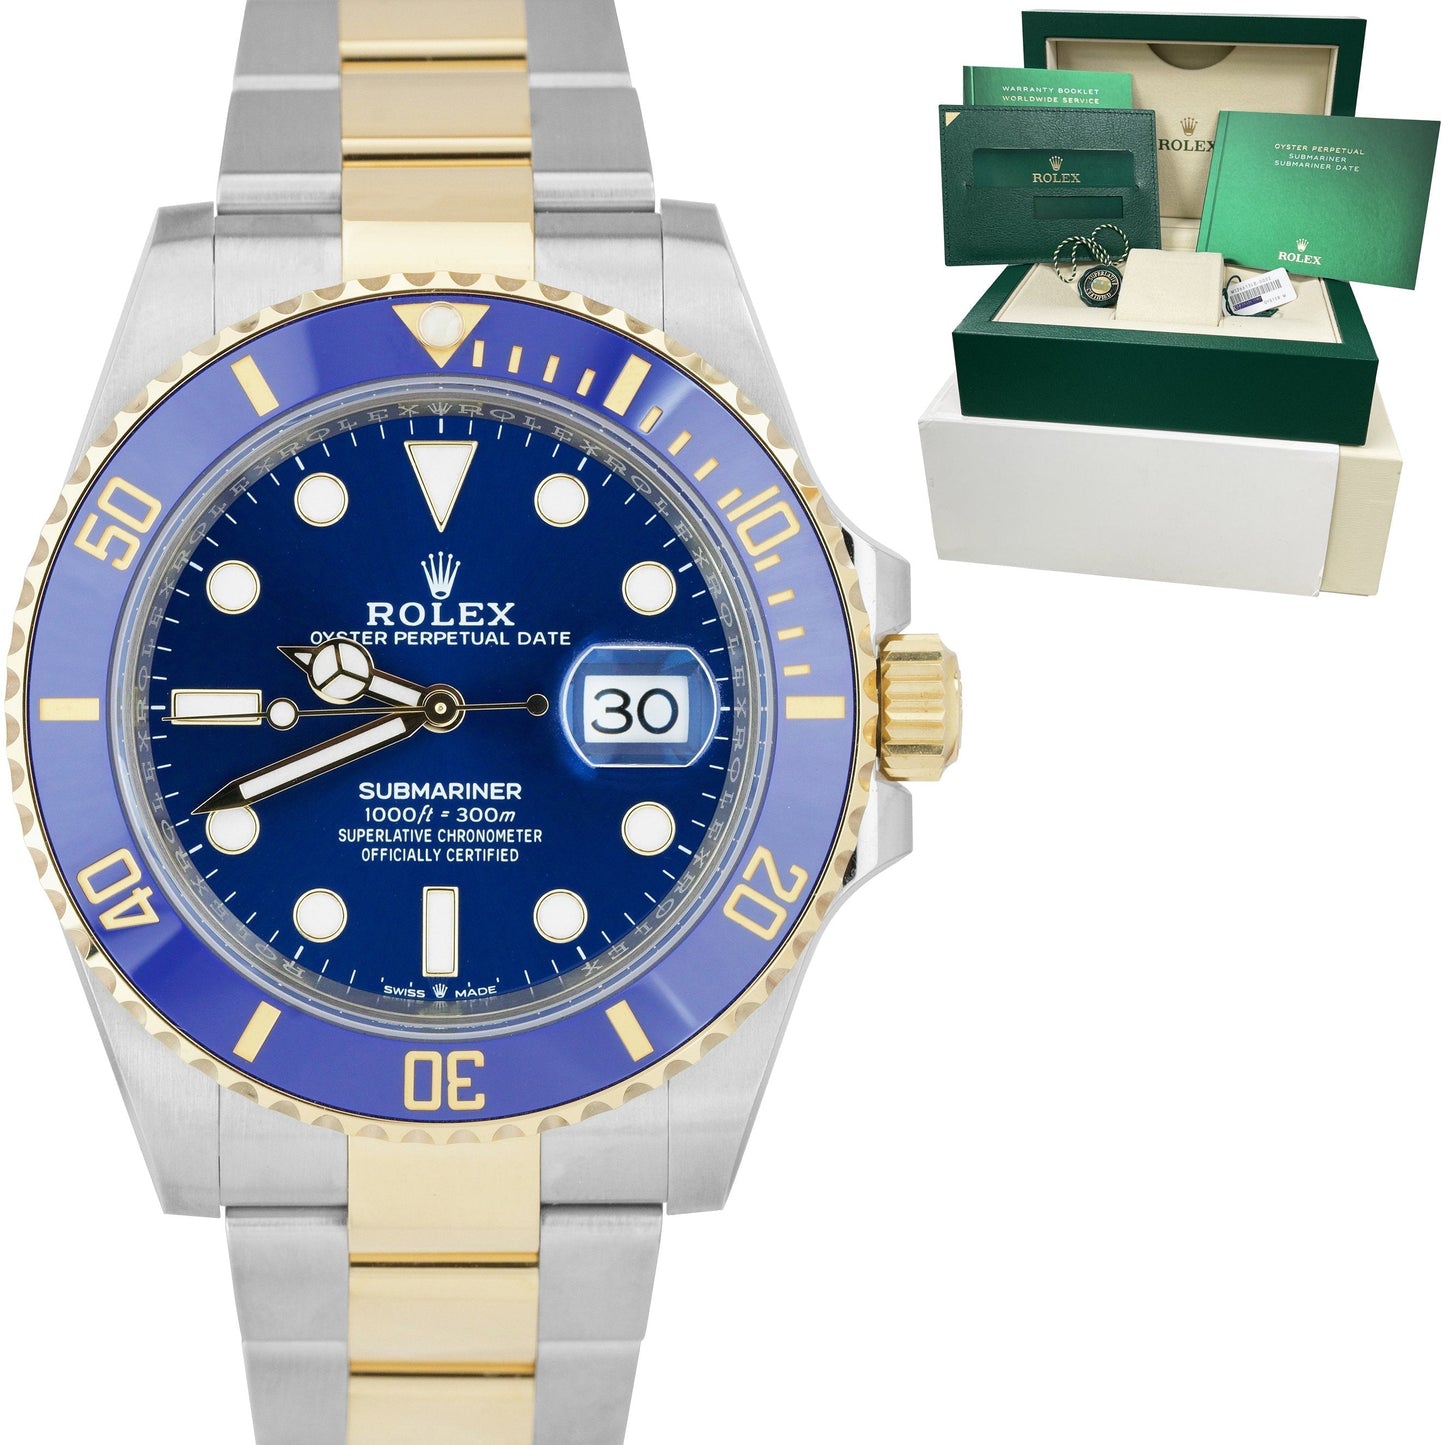 2021 NEW CARD Rolex Submariner Date 41mm Two-Tone Gold Blue Watch 126613 LB